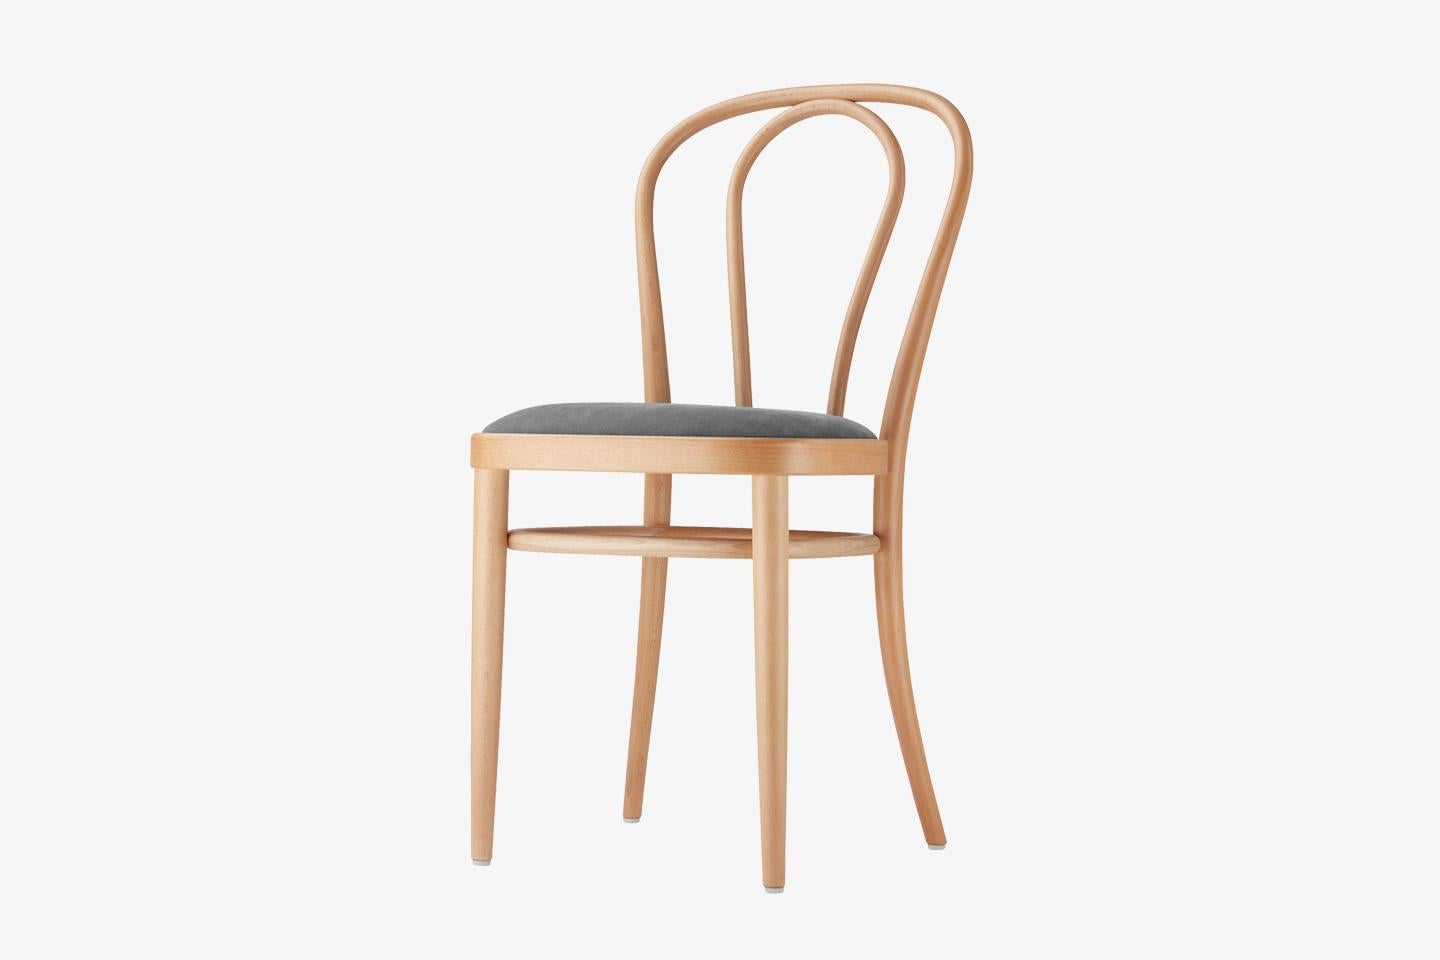 German Customizable 218 Chair Bentwood Chair by Gebrüder T, 1819 For Sale